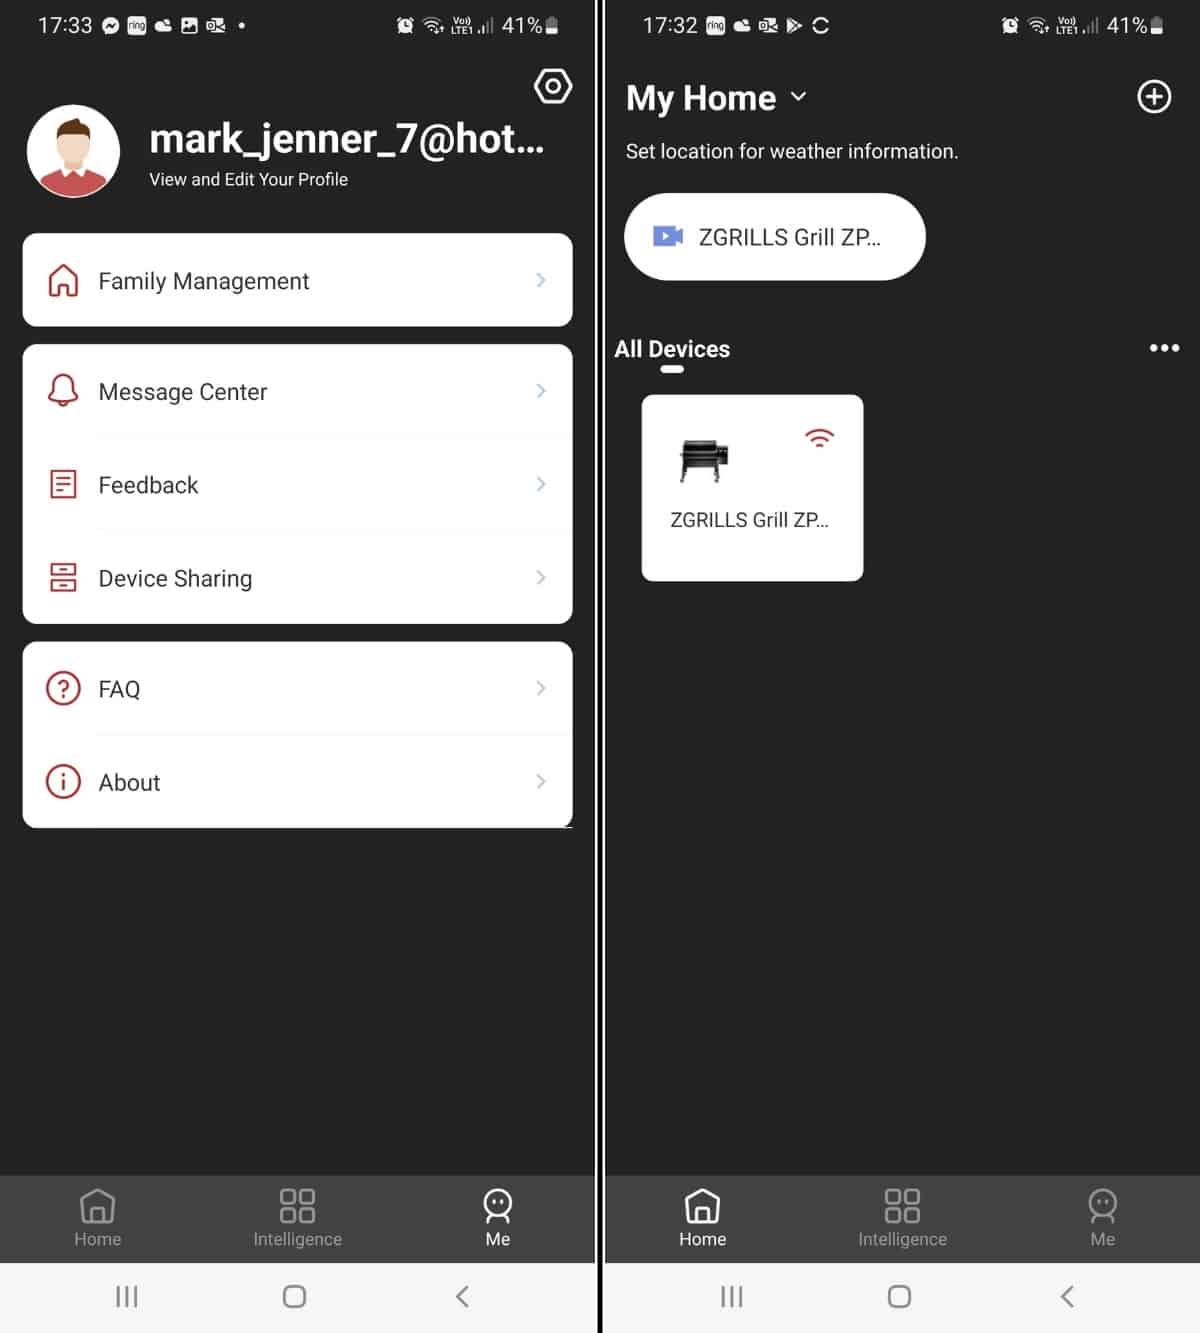 z grills smartphone app screenshots showing the settings availa.